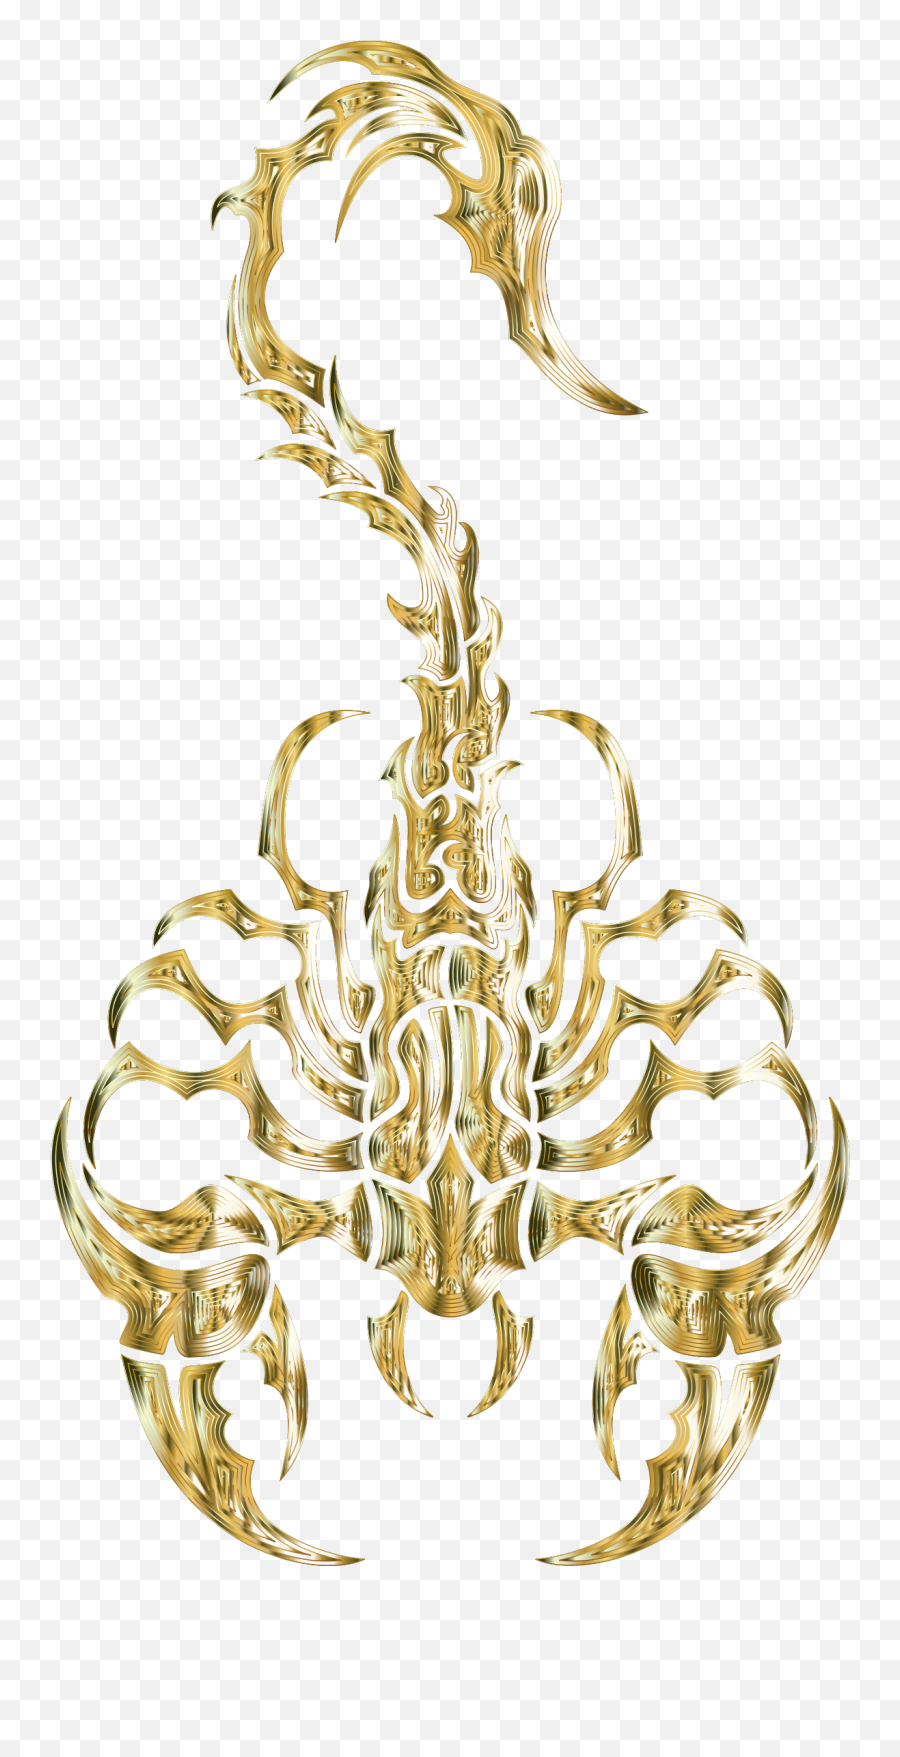 Scorpion Clipart Gold - Gold Scorpion Png Transparent Scorpion Gold Png Emoji,Scorpion Clipart